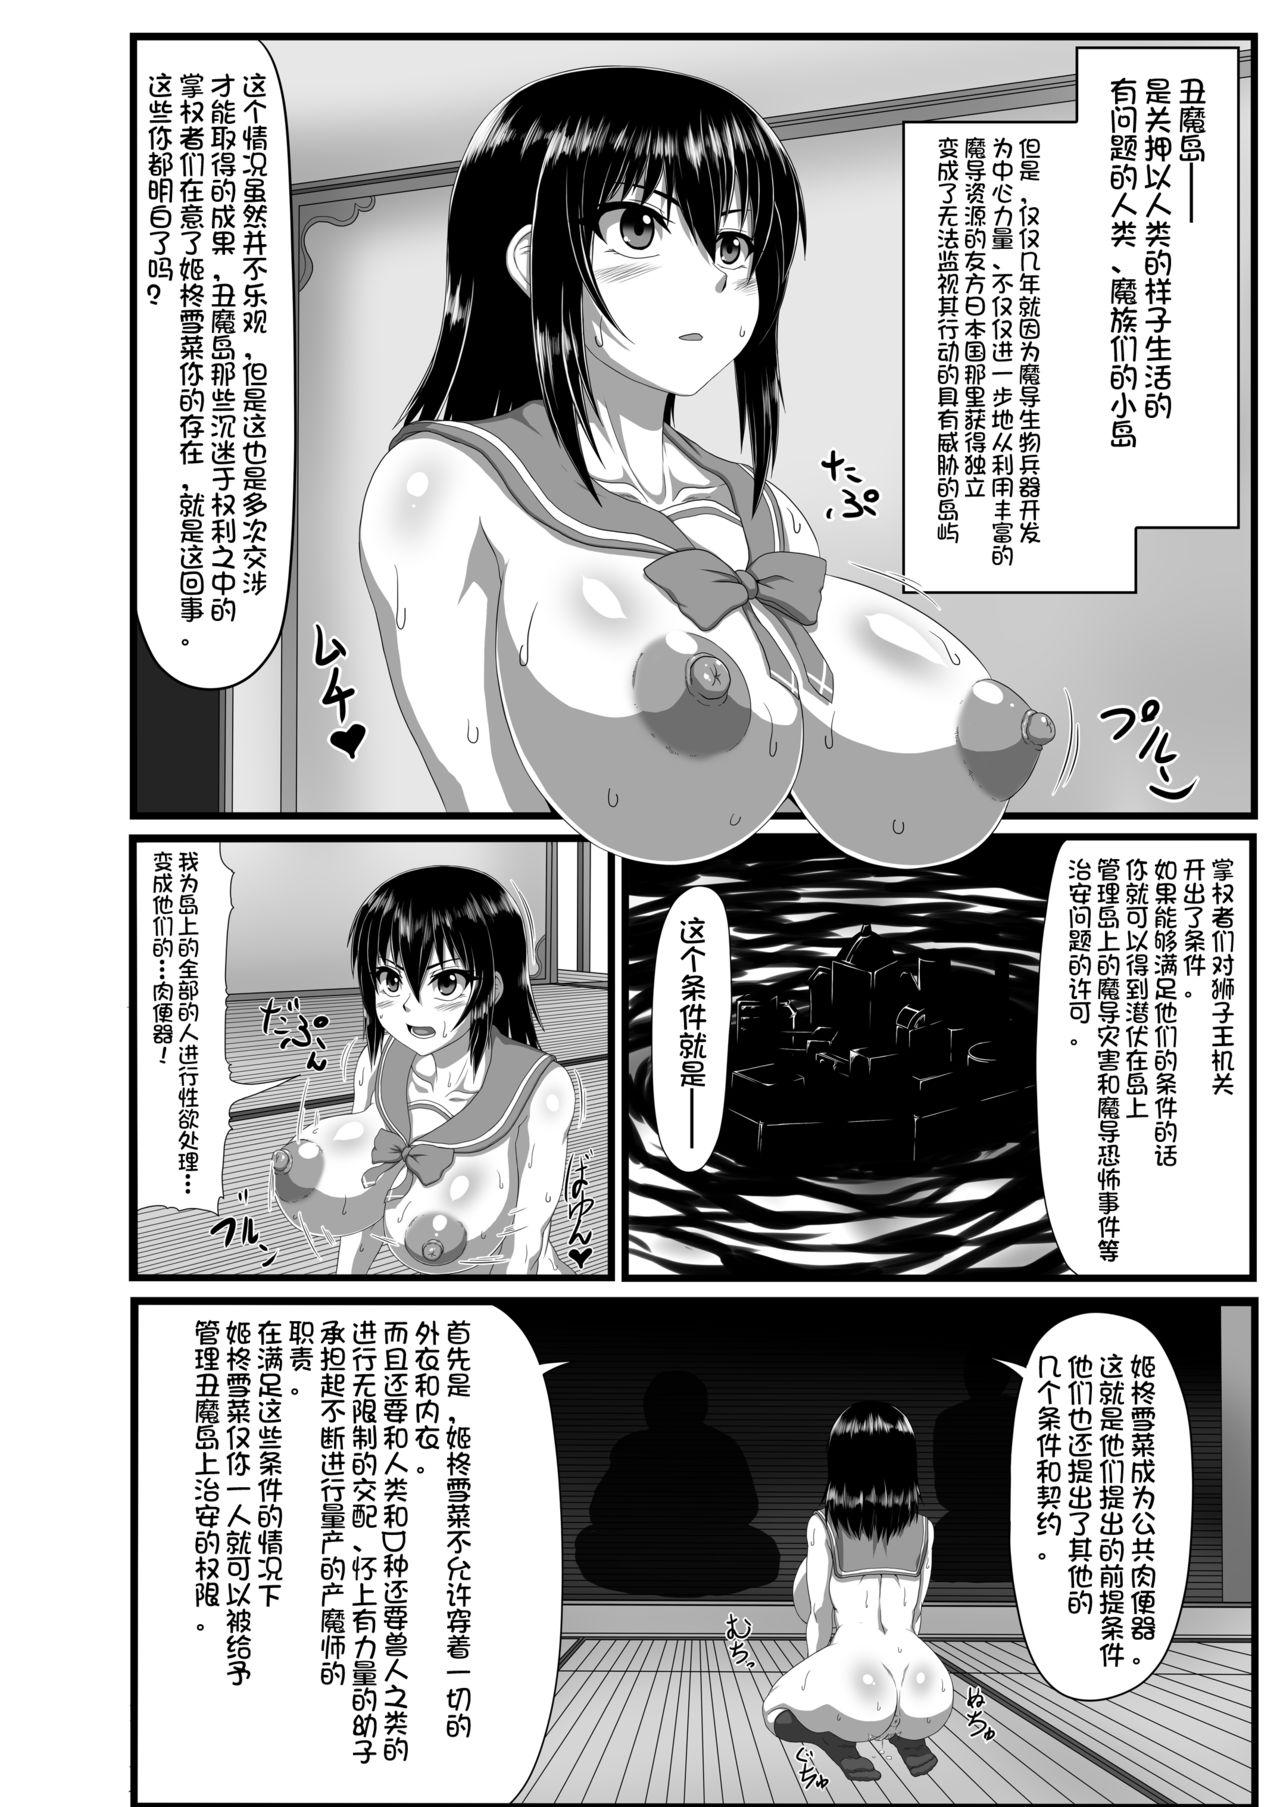 Free Blow Job Slave the Blood - Strike the blood Bed - Page 7